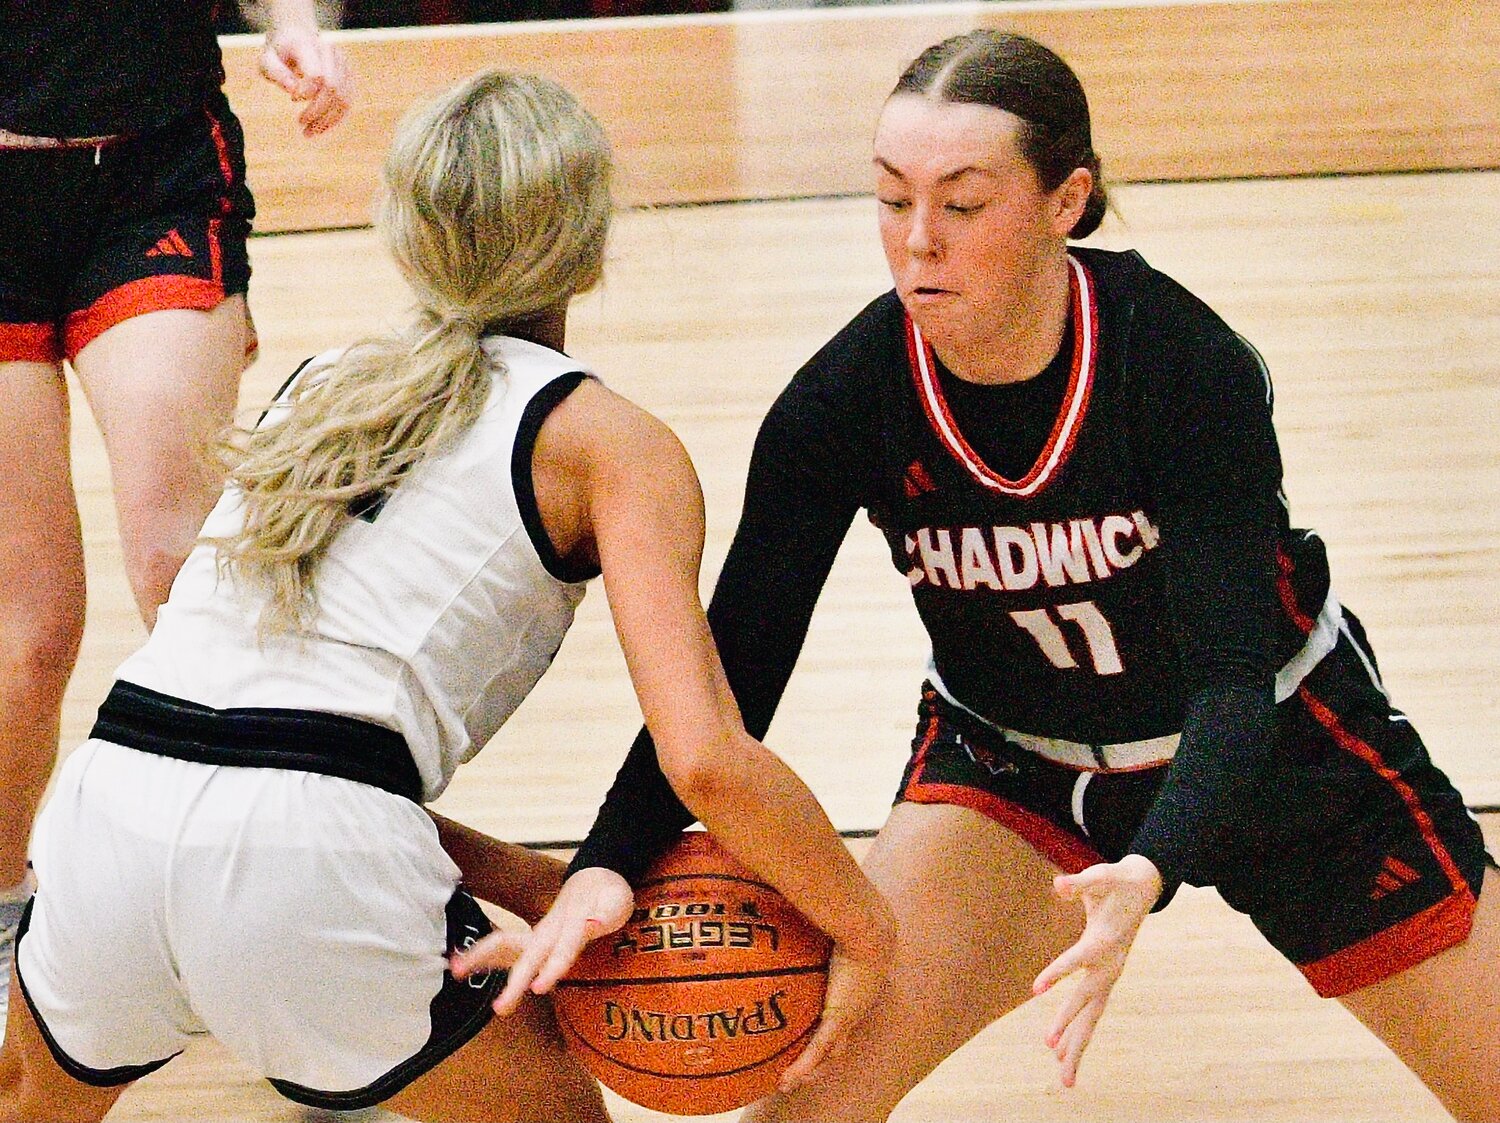 CHADWICK'S ELLA HERD forces a tie-up against Sparta's Averi Leyland.